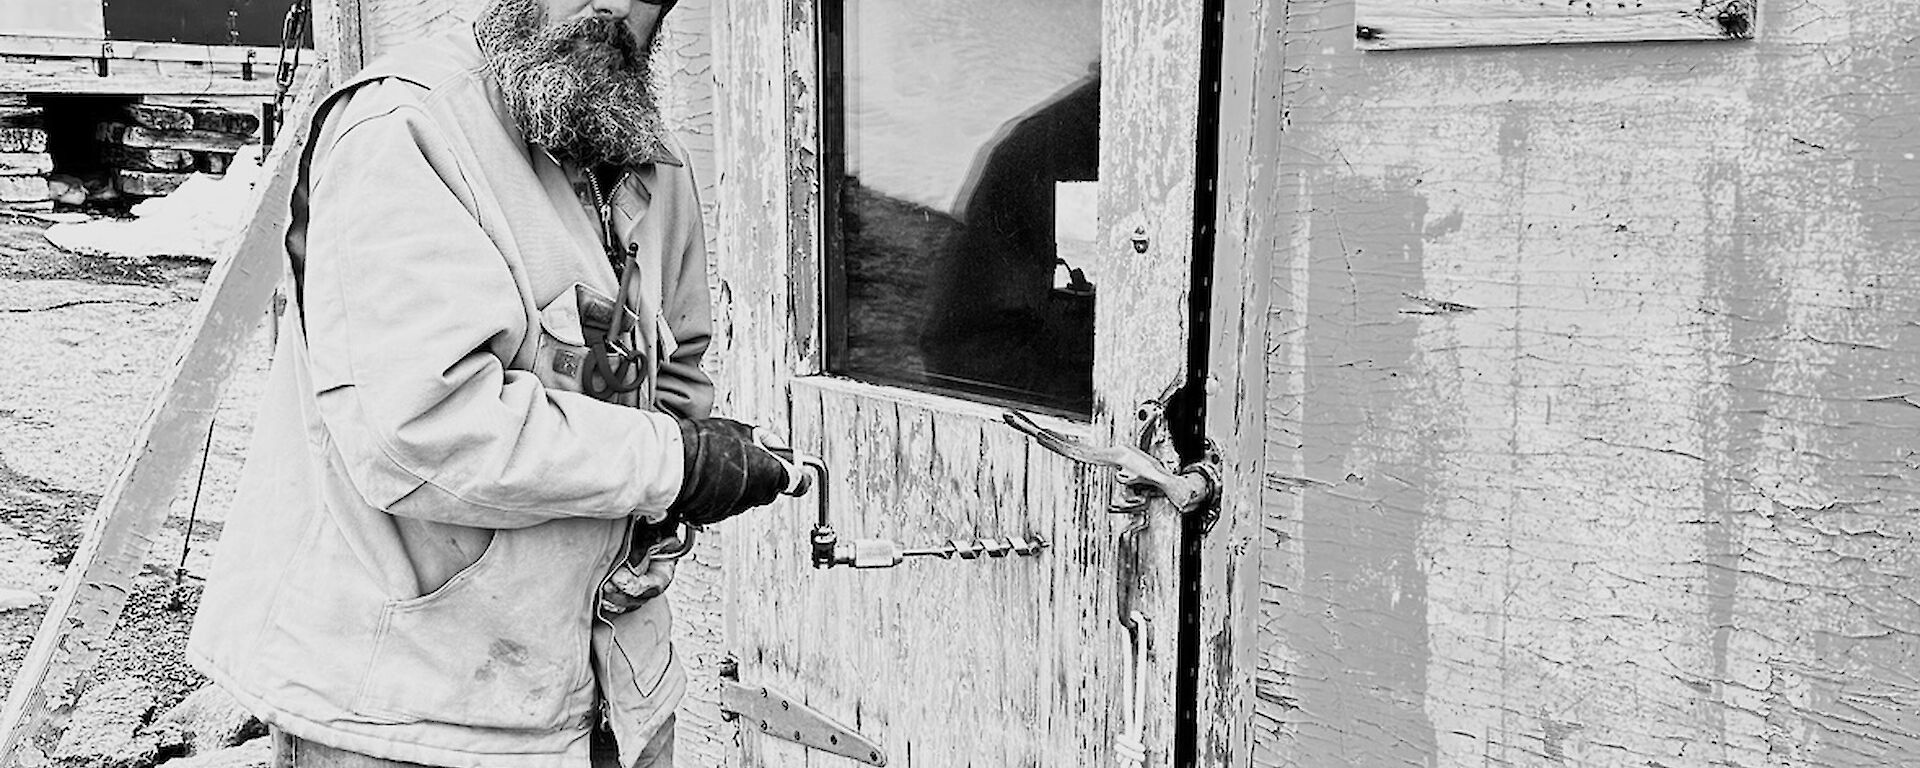 A black and white photograph of a man holding a hand drill against the door of an old, worn building.